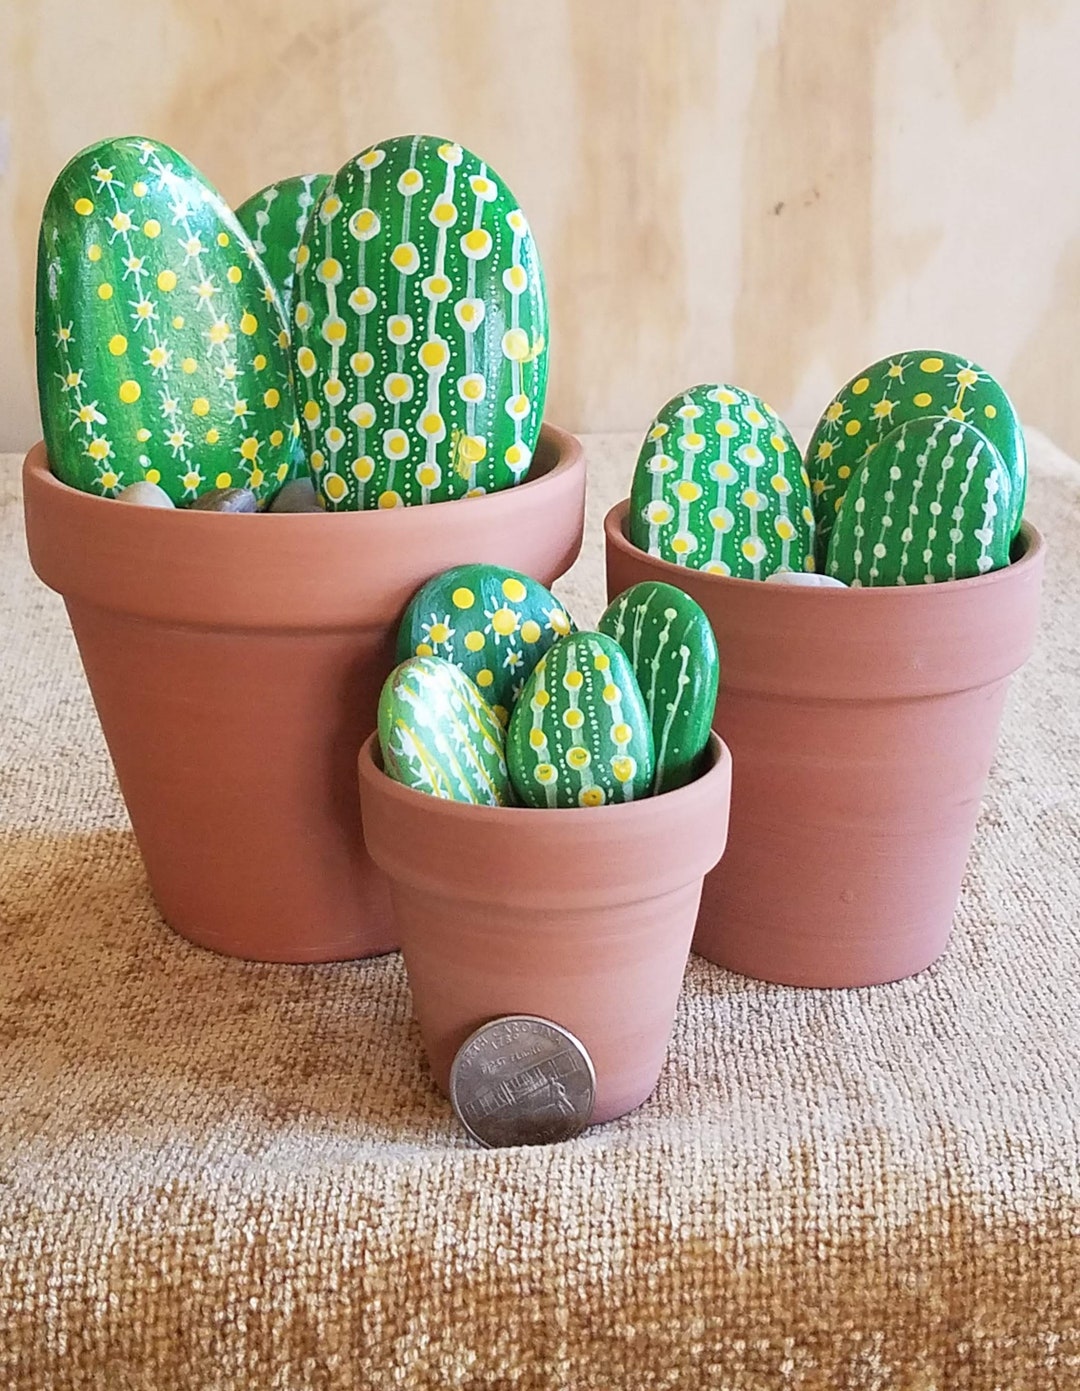 50+ painted rocks that look like succulents & cacti - I Love